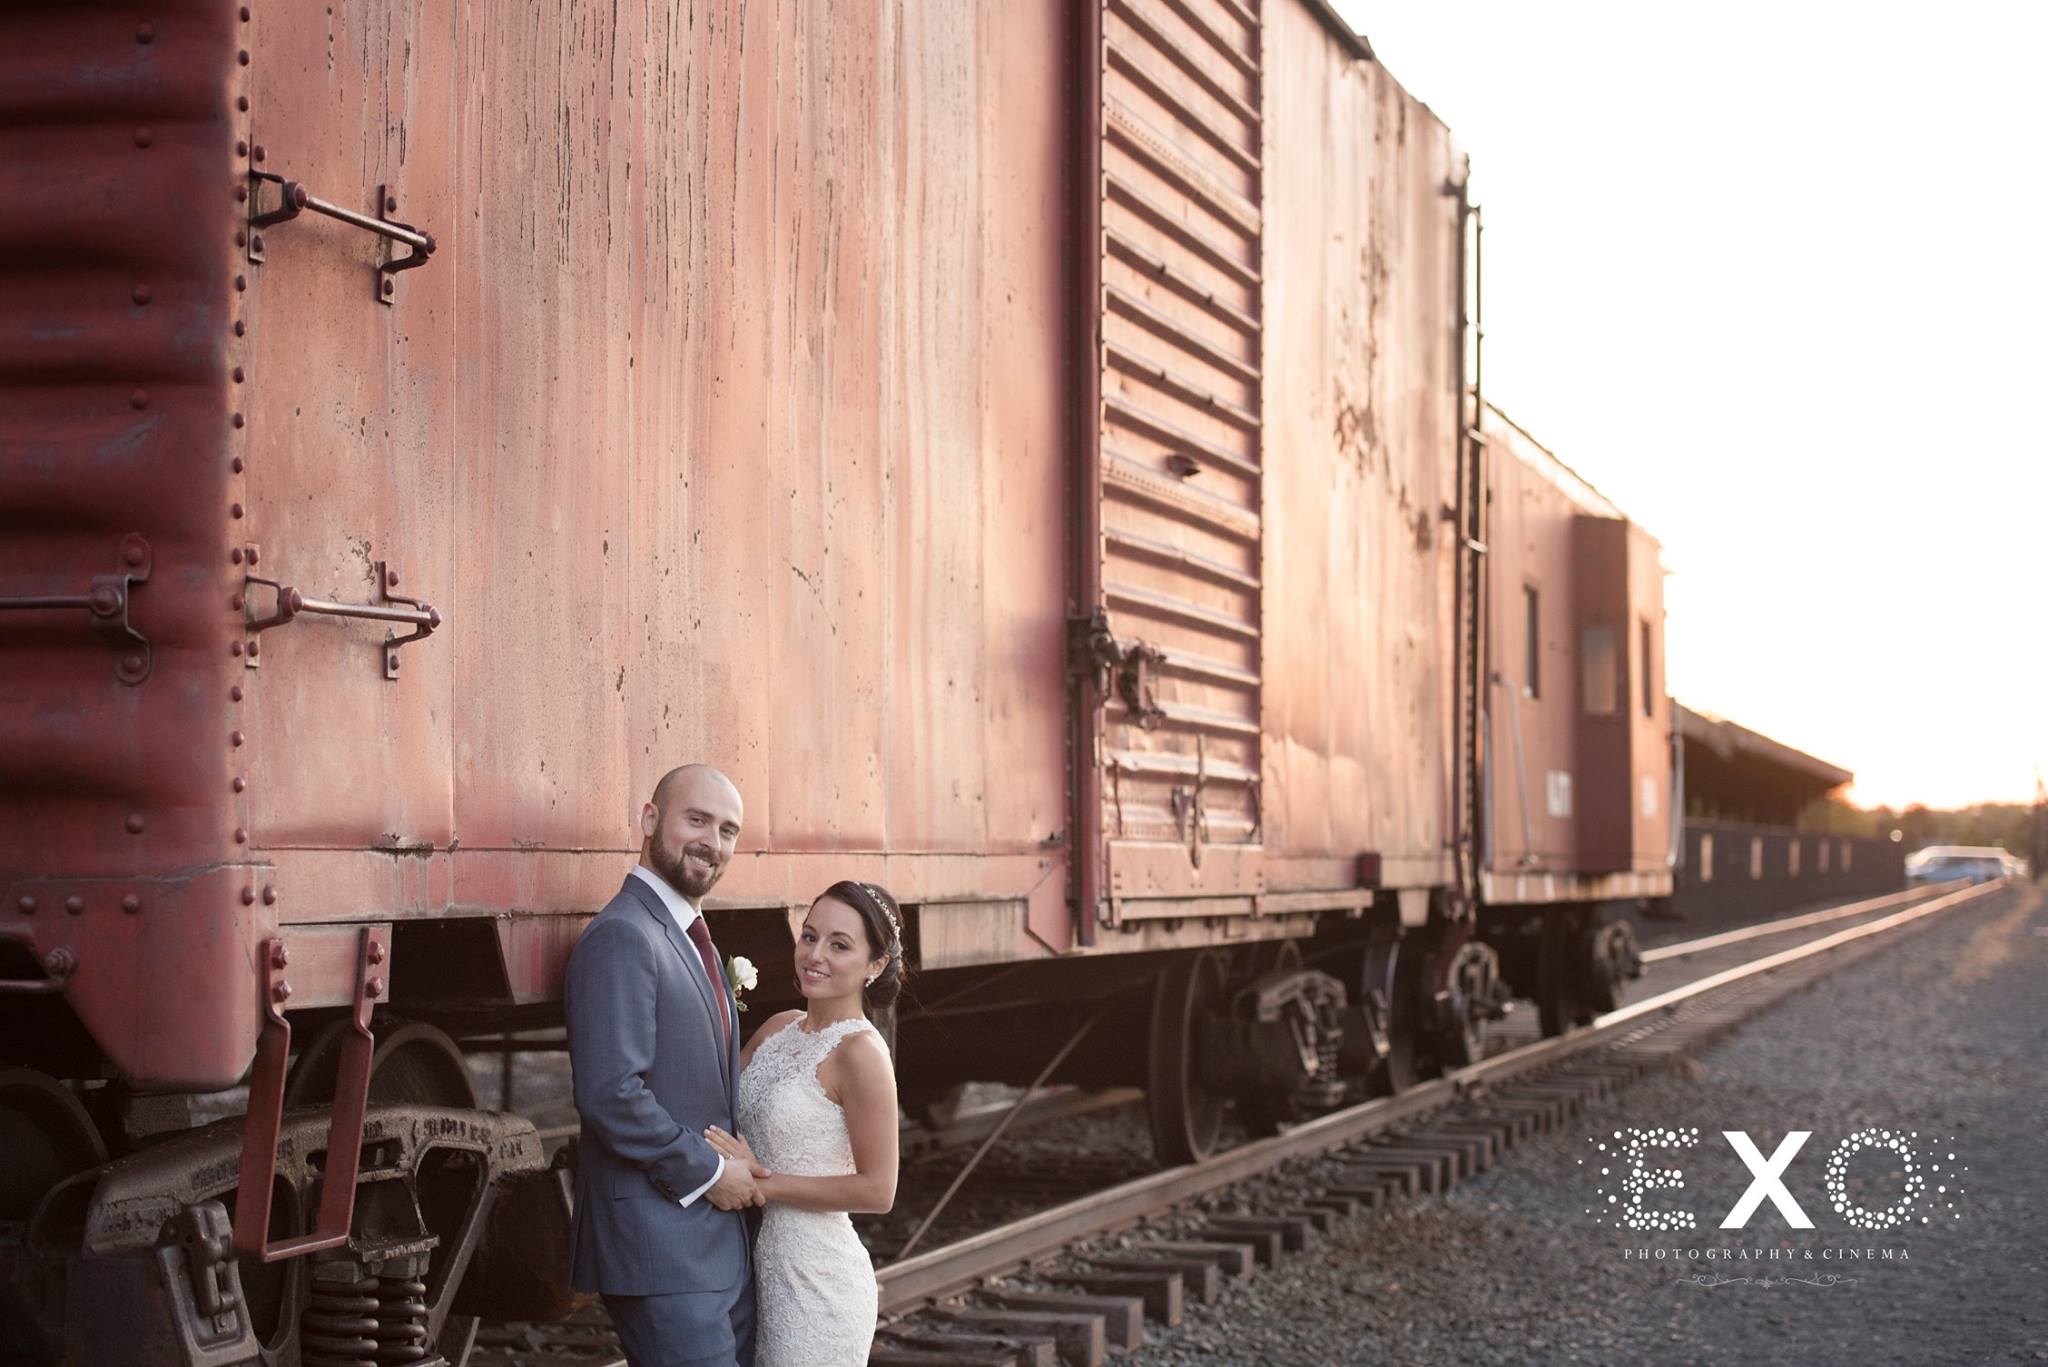 bride and groom standing by train car